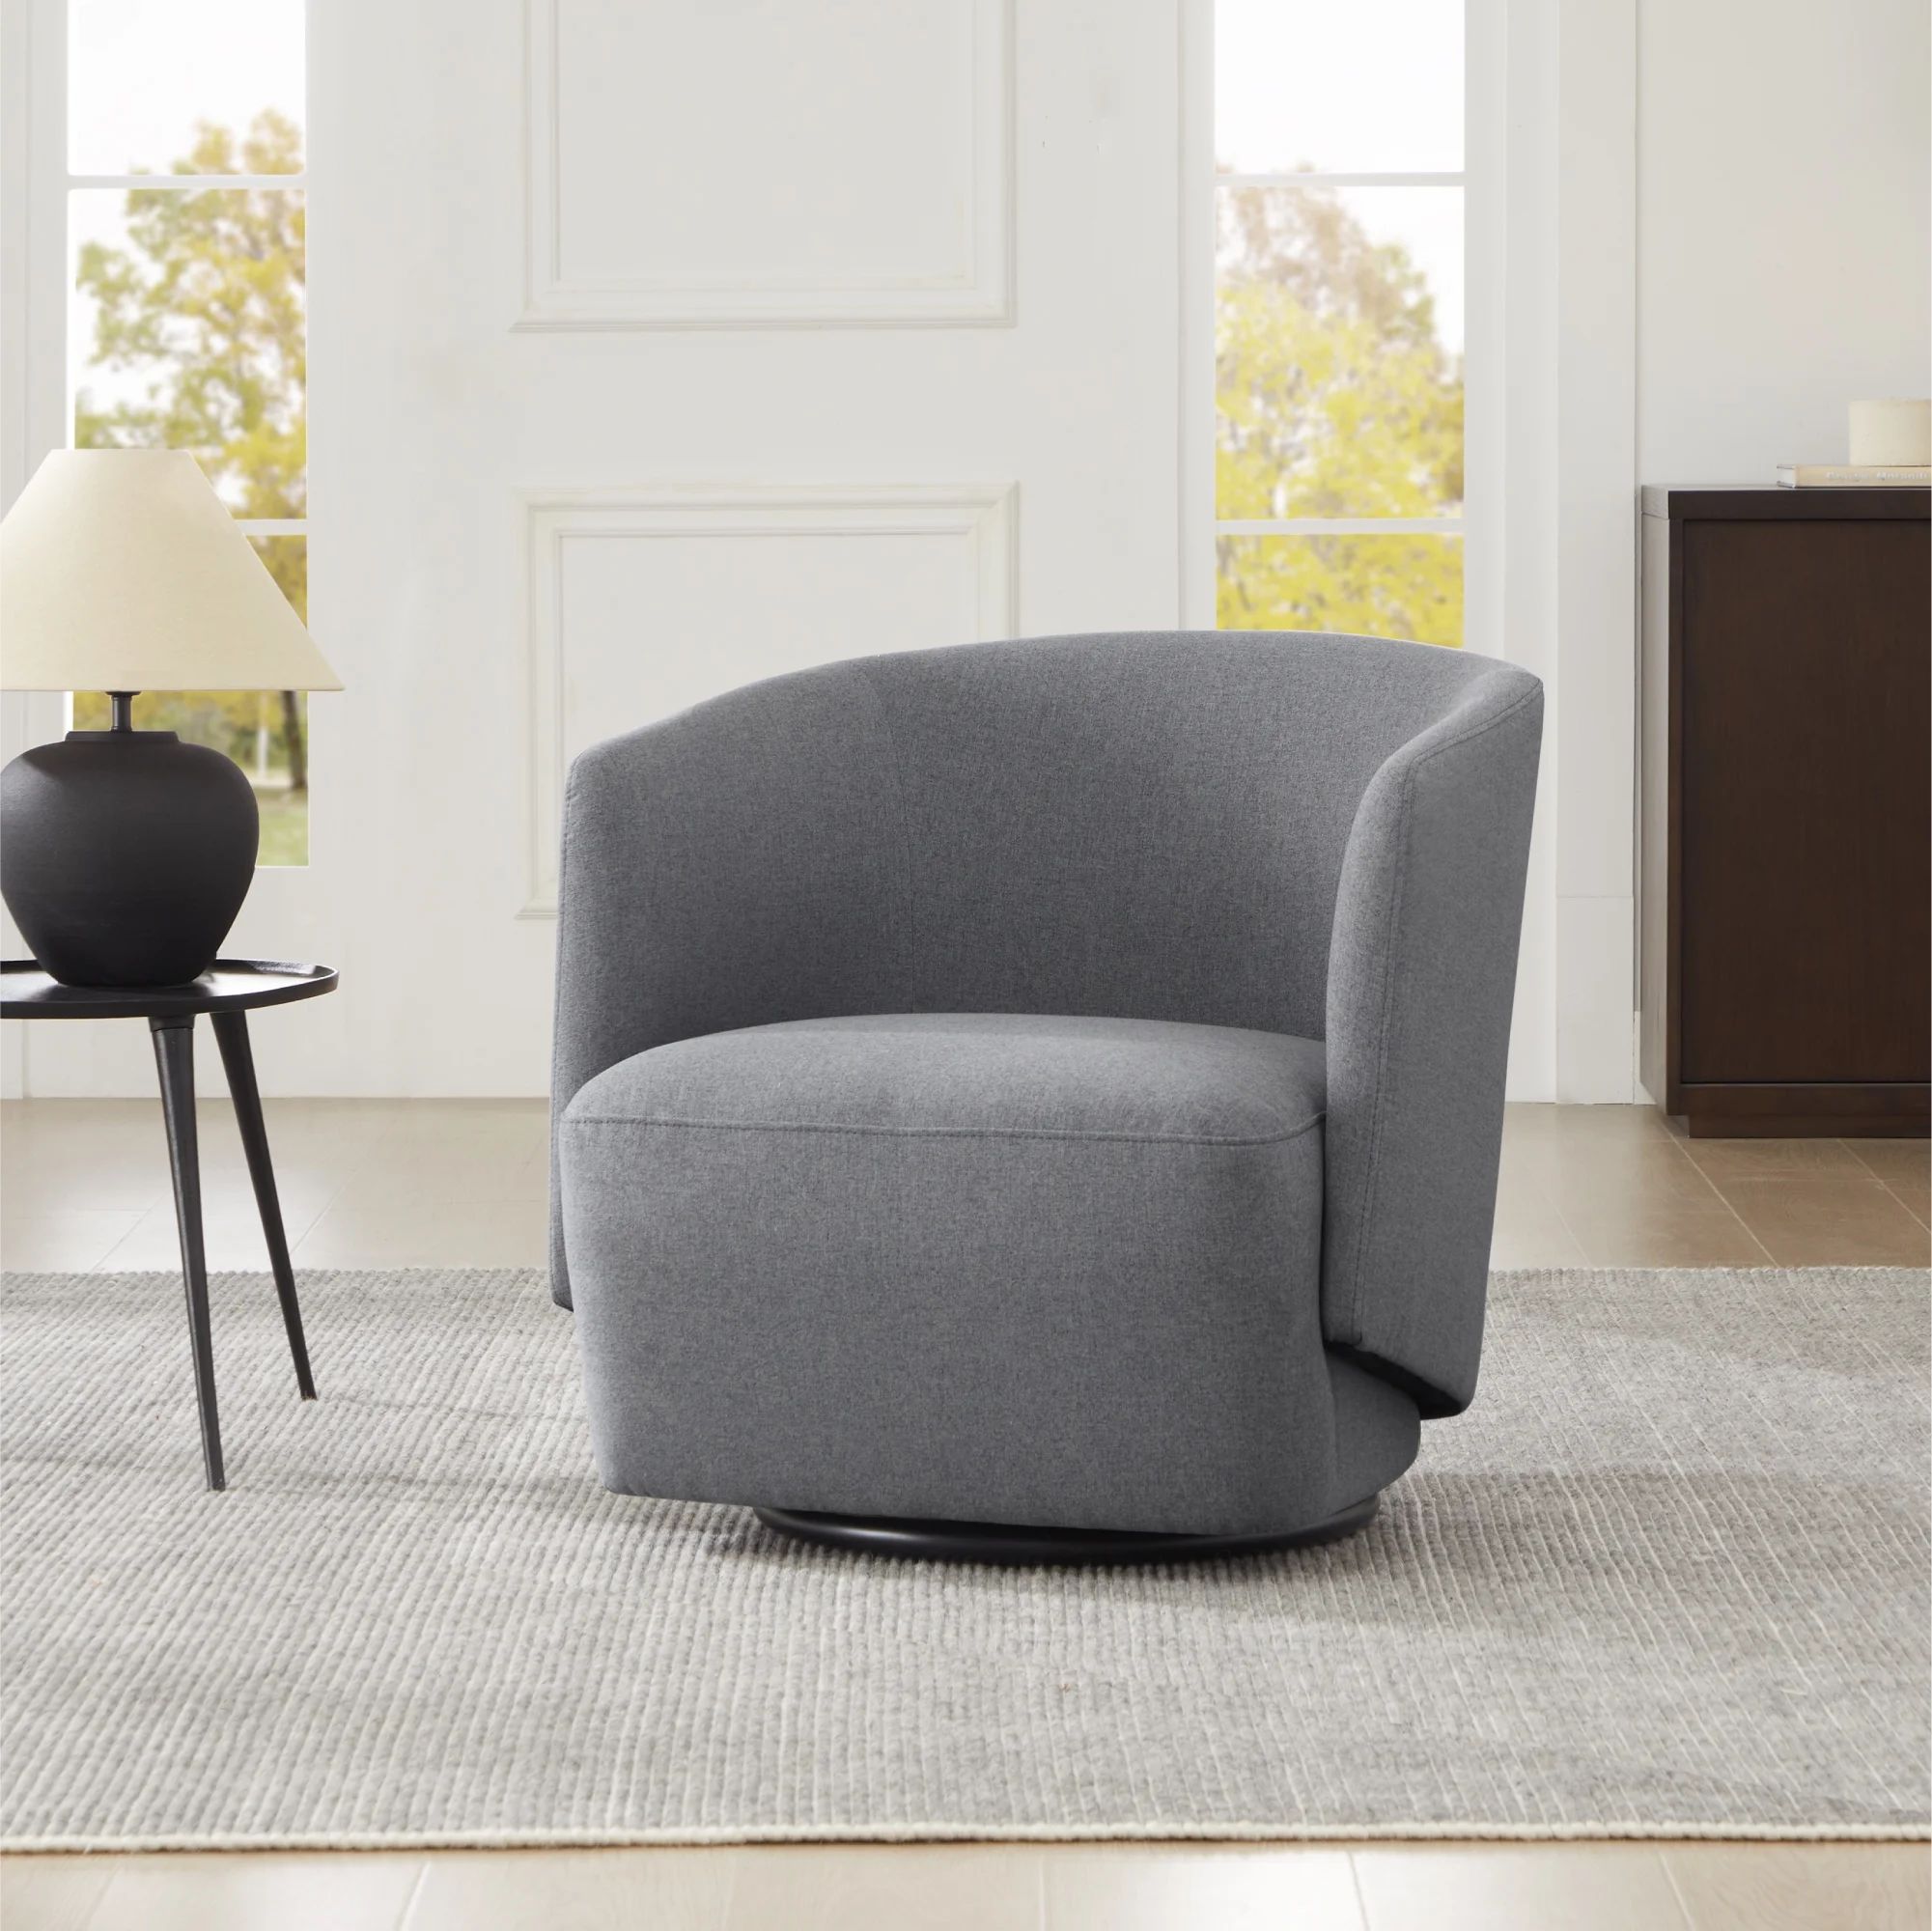 CHITA Swivel Accent Chair Upholstered Barrel Arm Chair for Living Room Bedroom, Fabric in Gray | Walmart (US)